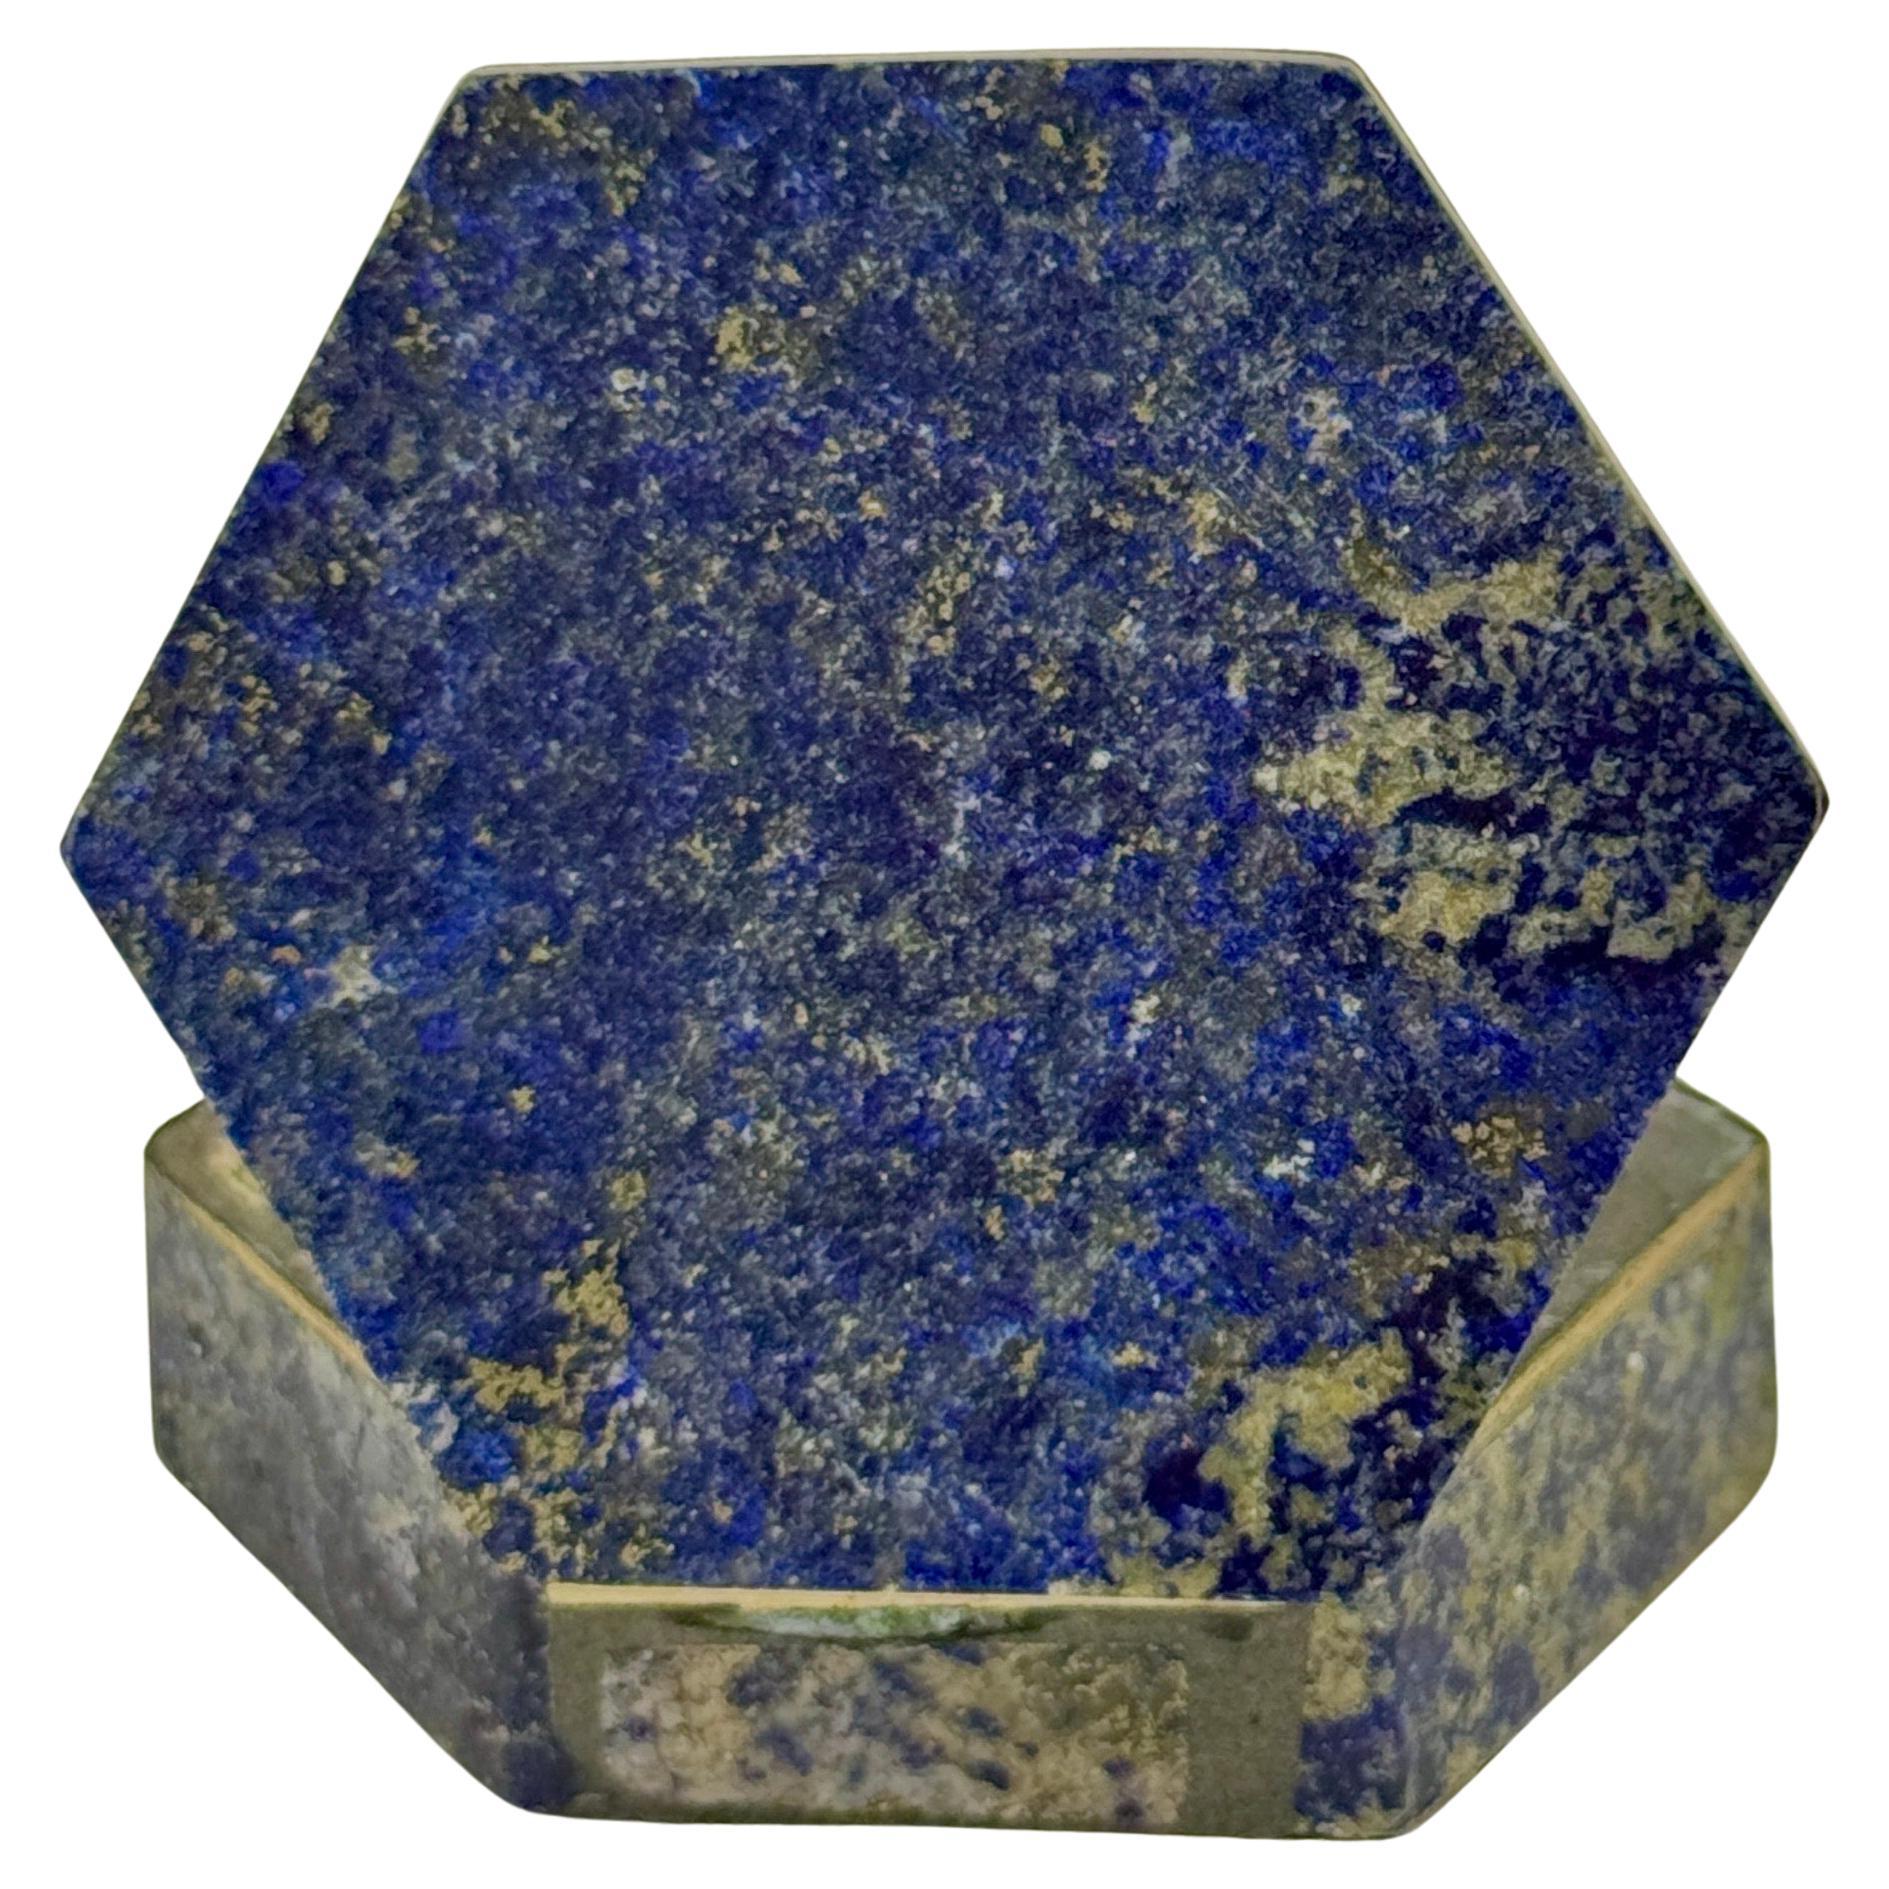 Hexagon Mini Lapis Lazuli Pill Box, Italy 1950's

Charming hinged trinket box for display or functional for jewelry. Wonderful piece to add to existing collection or start a new one. 